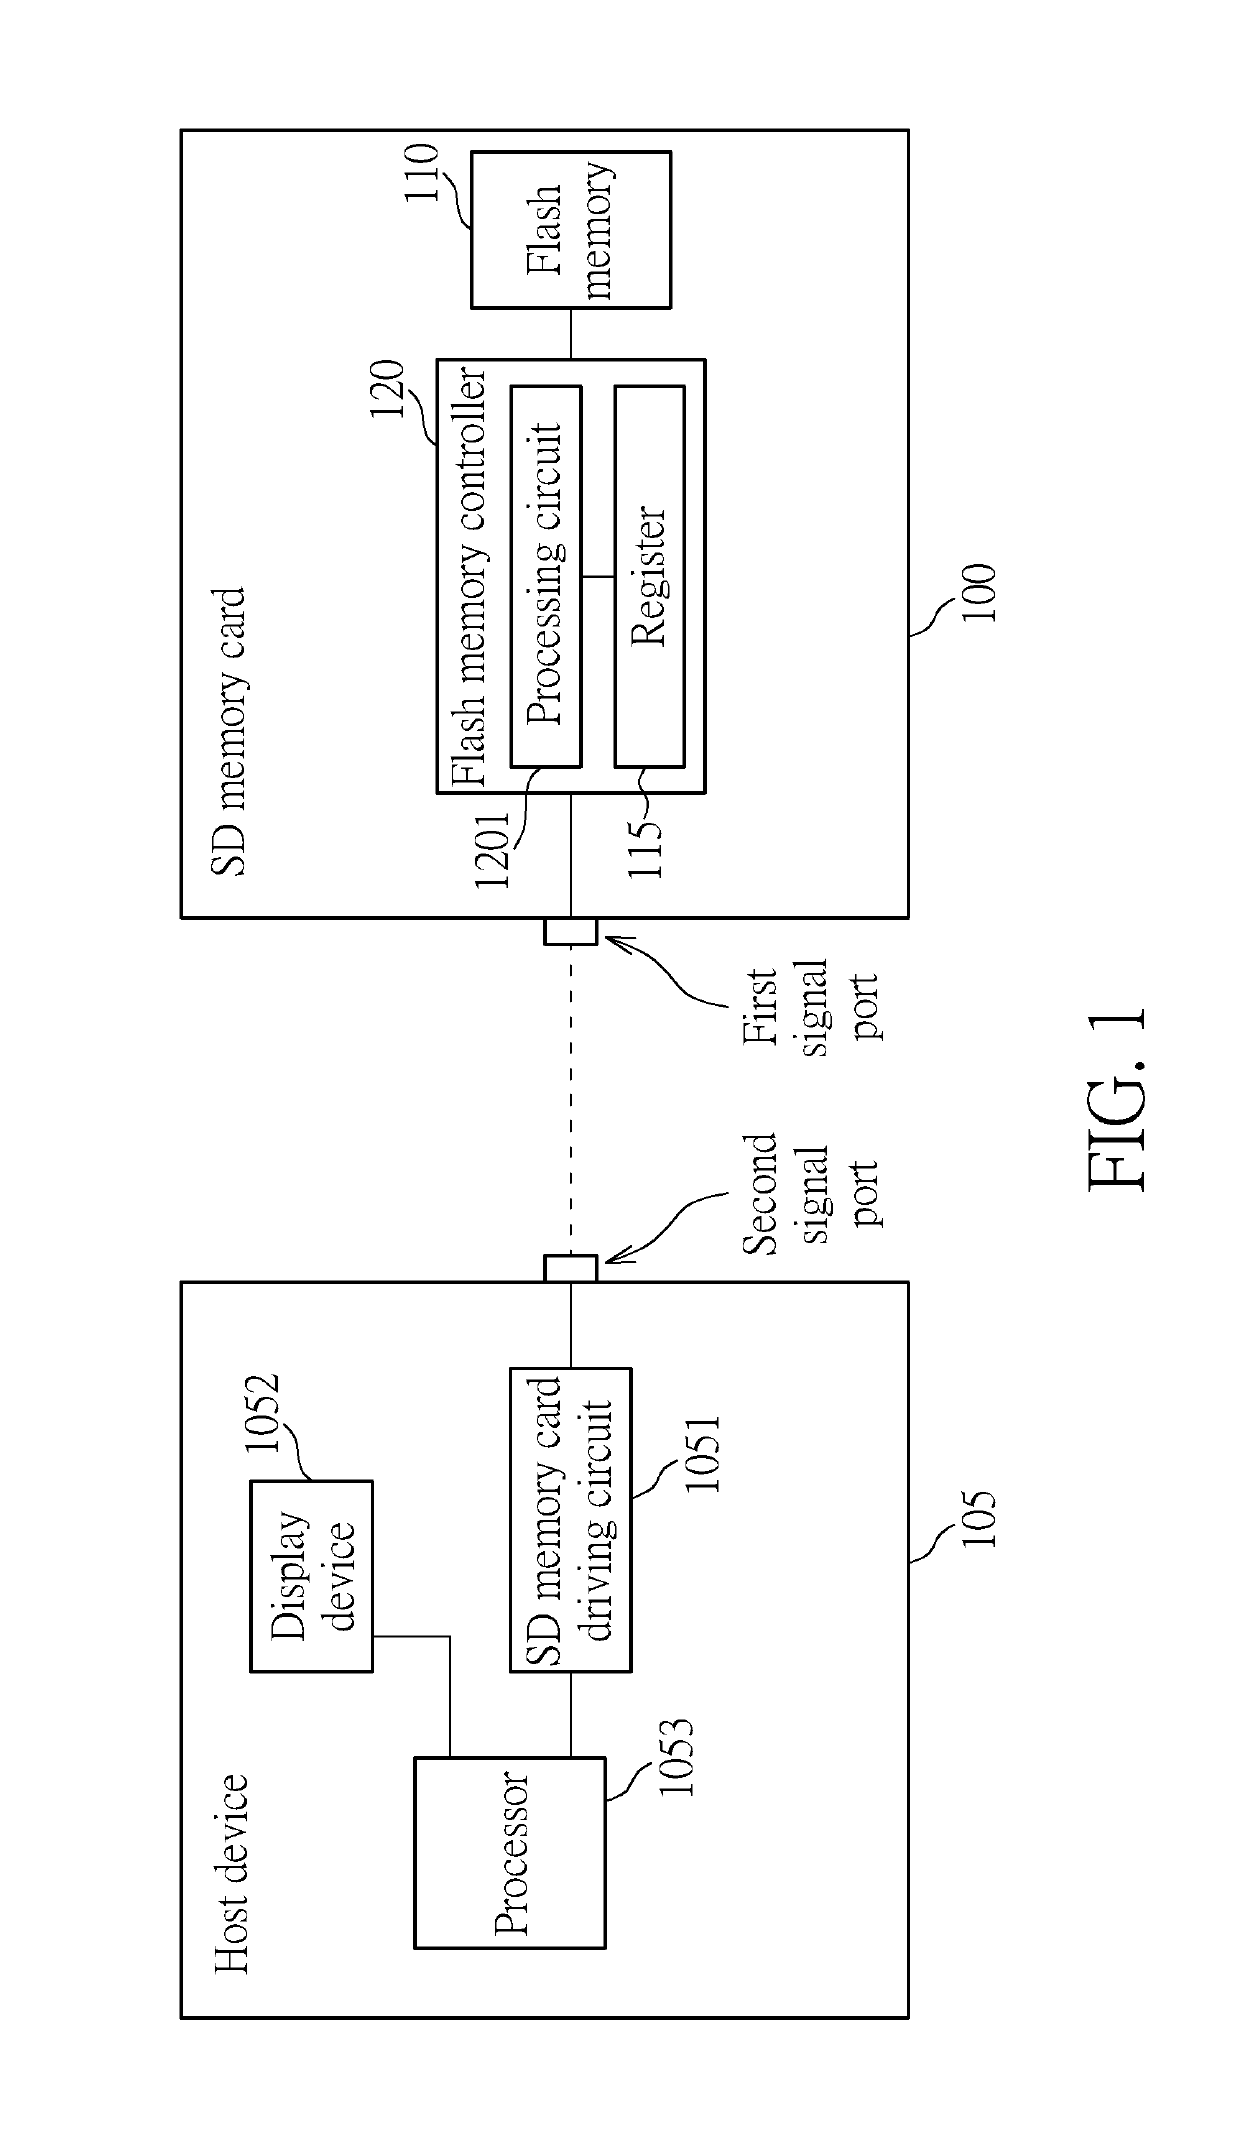 Flash memory controller, sd card device, method used in flash memory controller, and host device coupled to sd card device